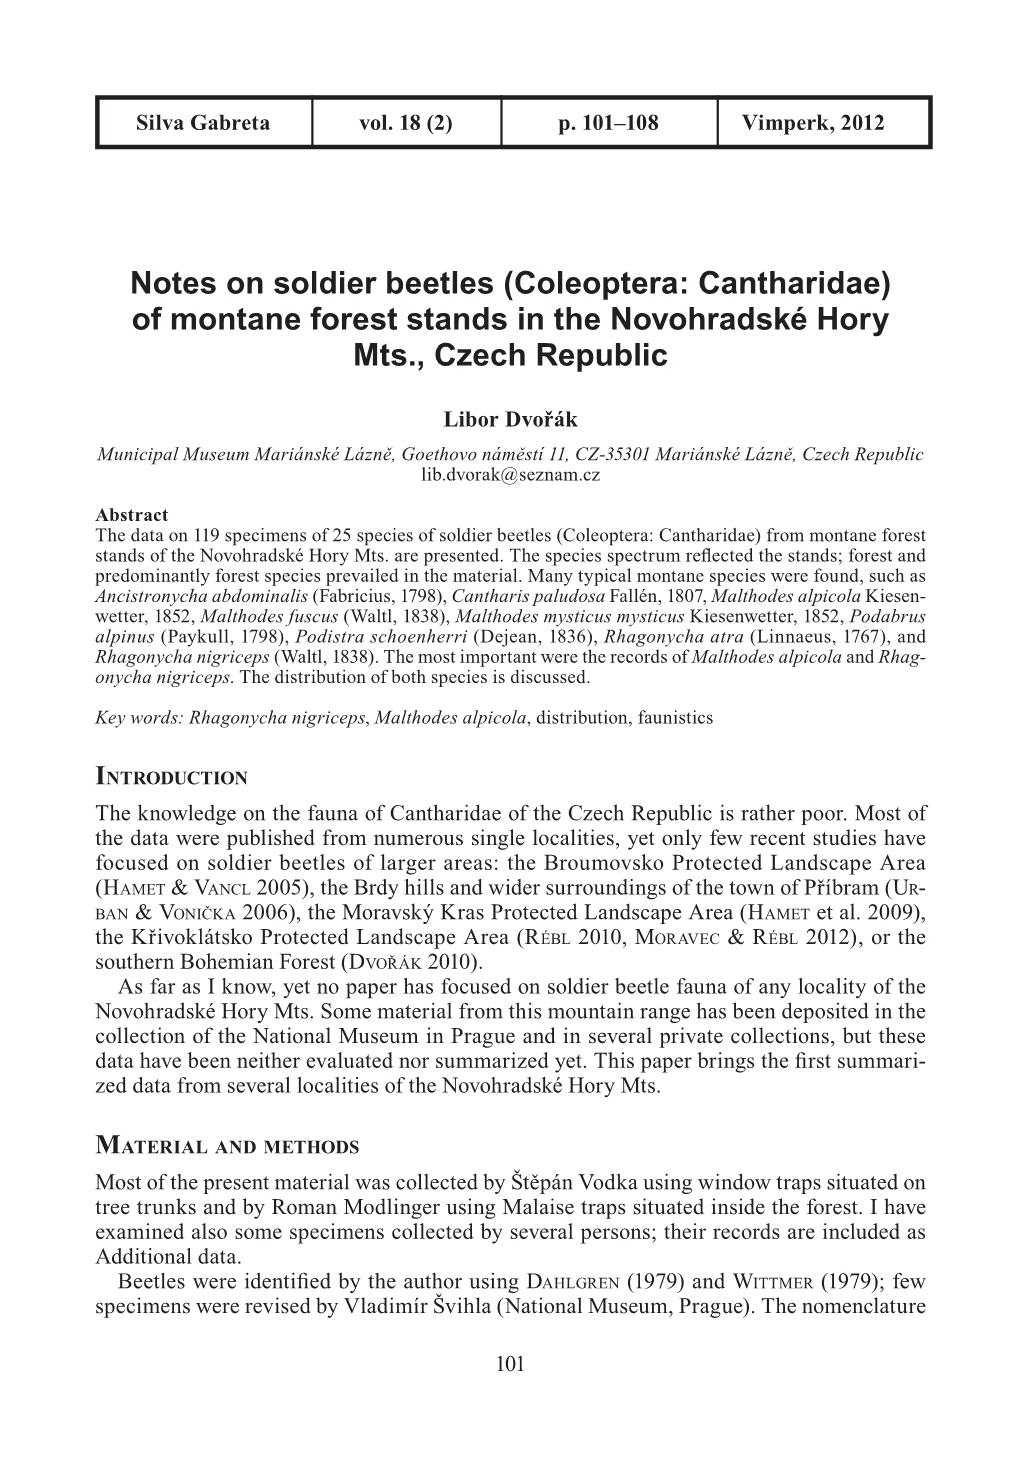 Notes on Soldier Beetles (Coleoptera: Cantharidae) of Montane Forest Stands in the Novohradské Hory Mts., Czech Republic